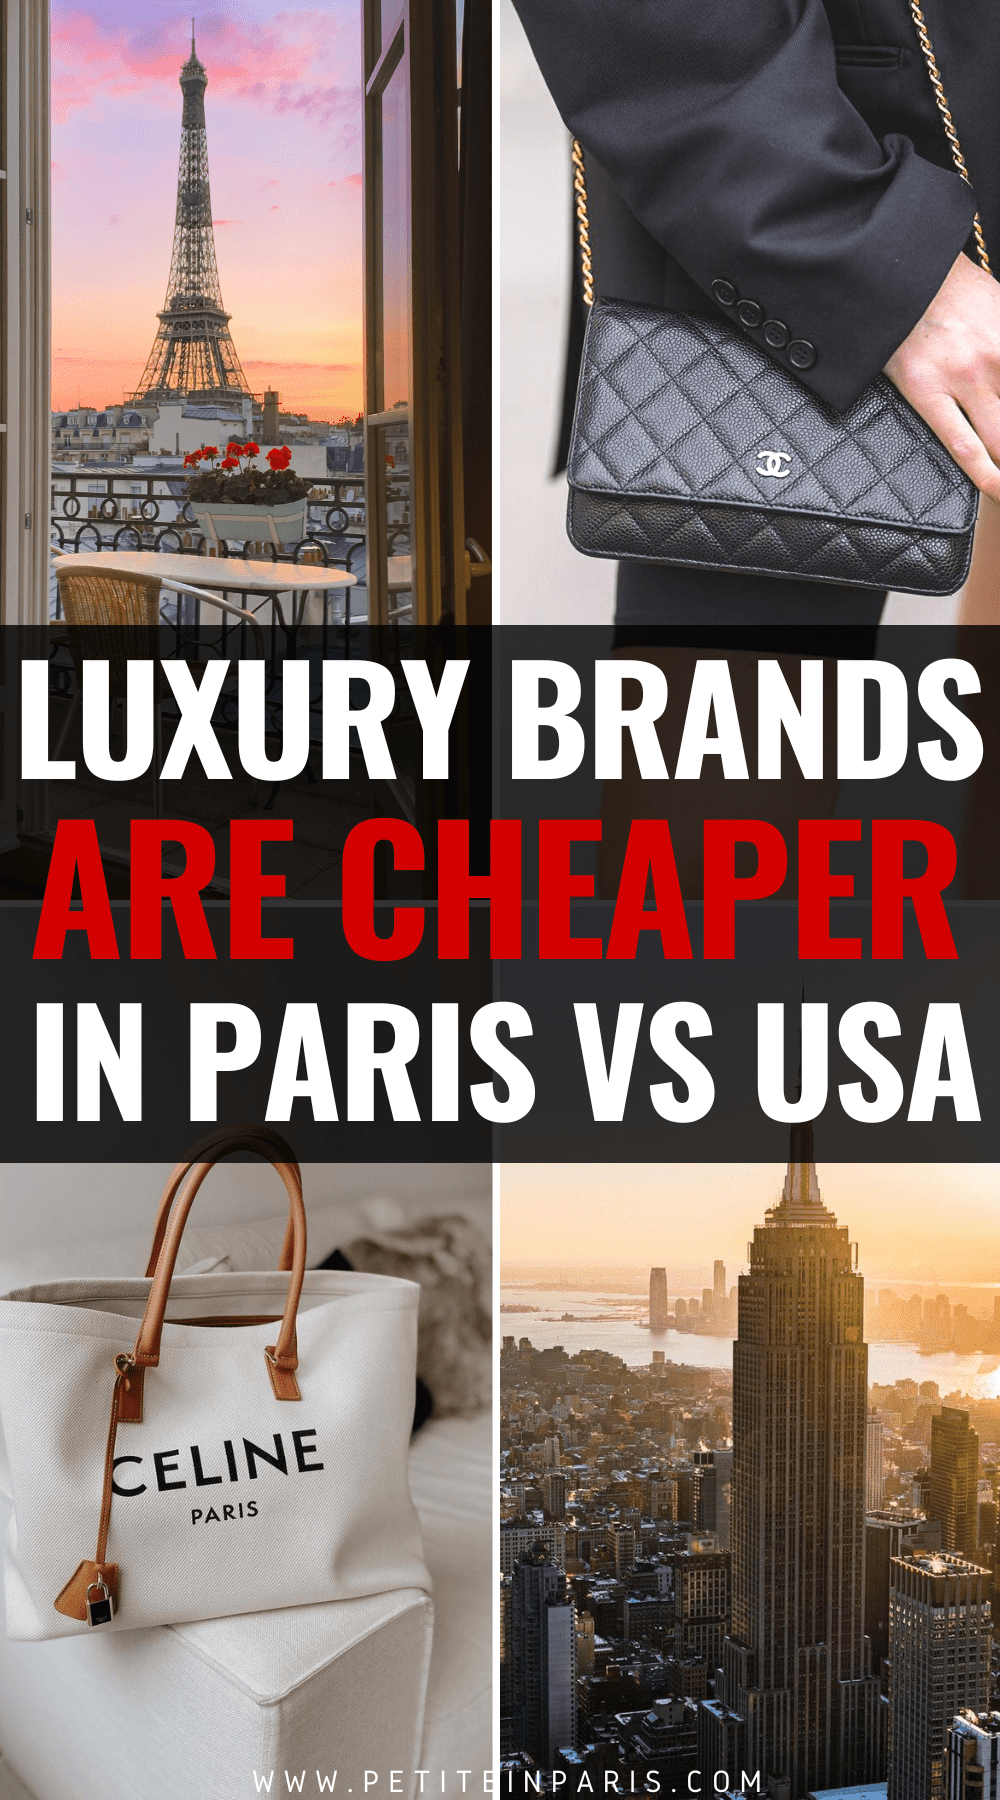 How To Save Money Shopping for Designer Brands in Paris